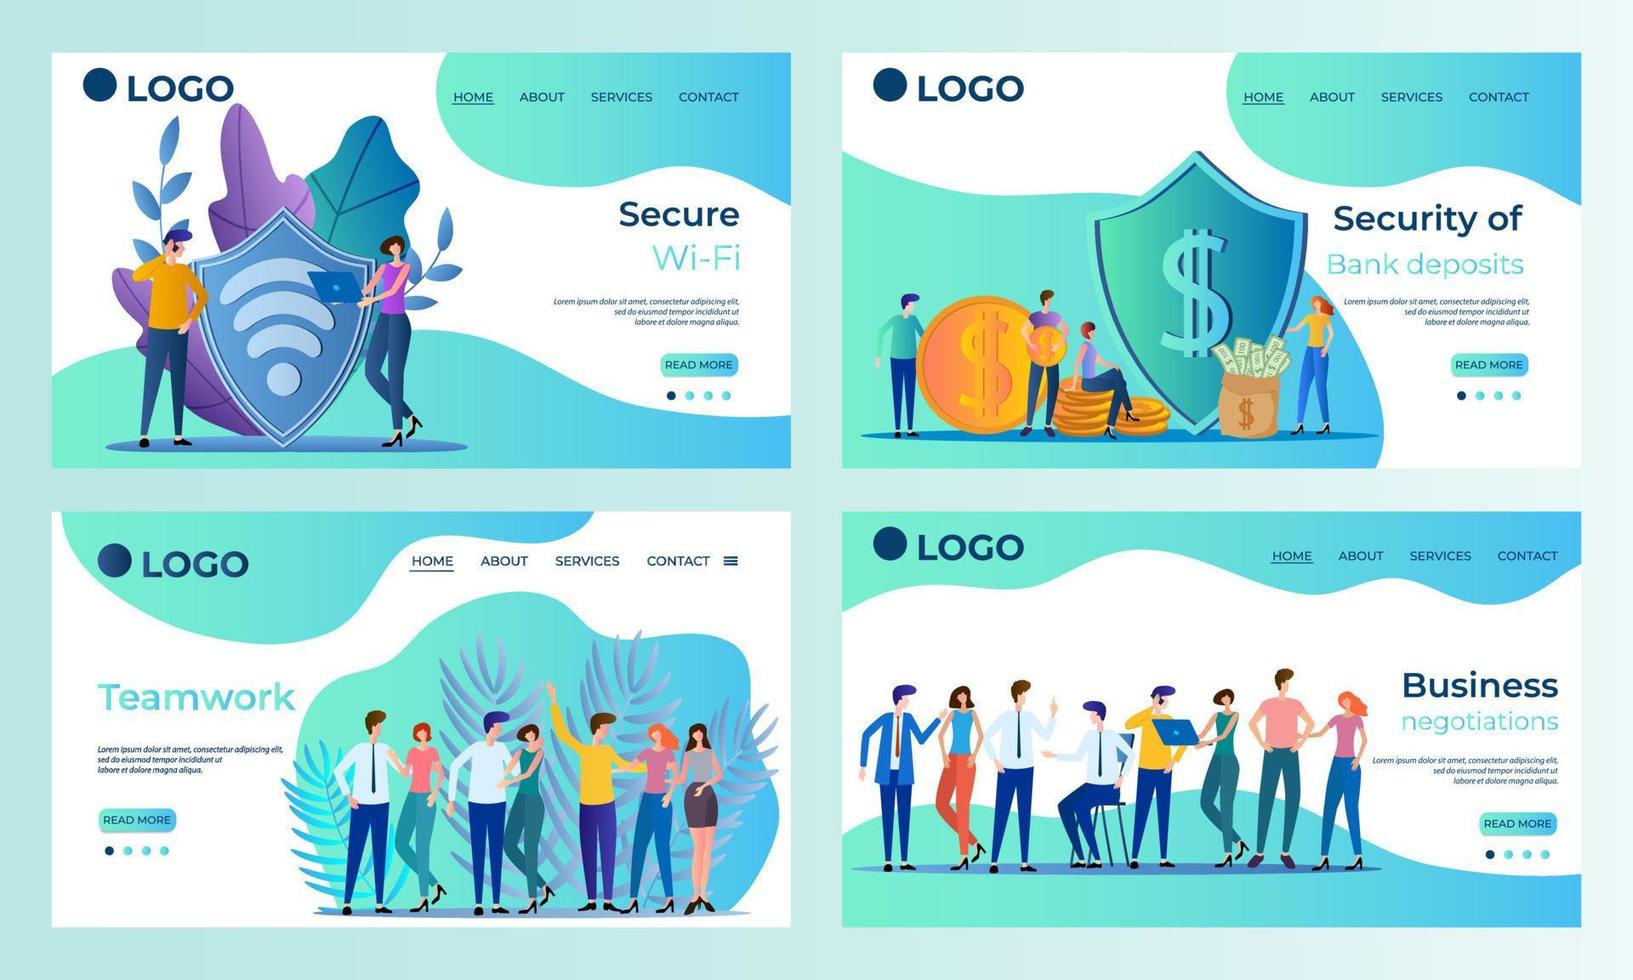 A set of landing page templates.Secure WI-FI,Bank Deposit Protection, Teamwork, Business negotiations.Templates for use in mobile app development.Flat vector illustration.